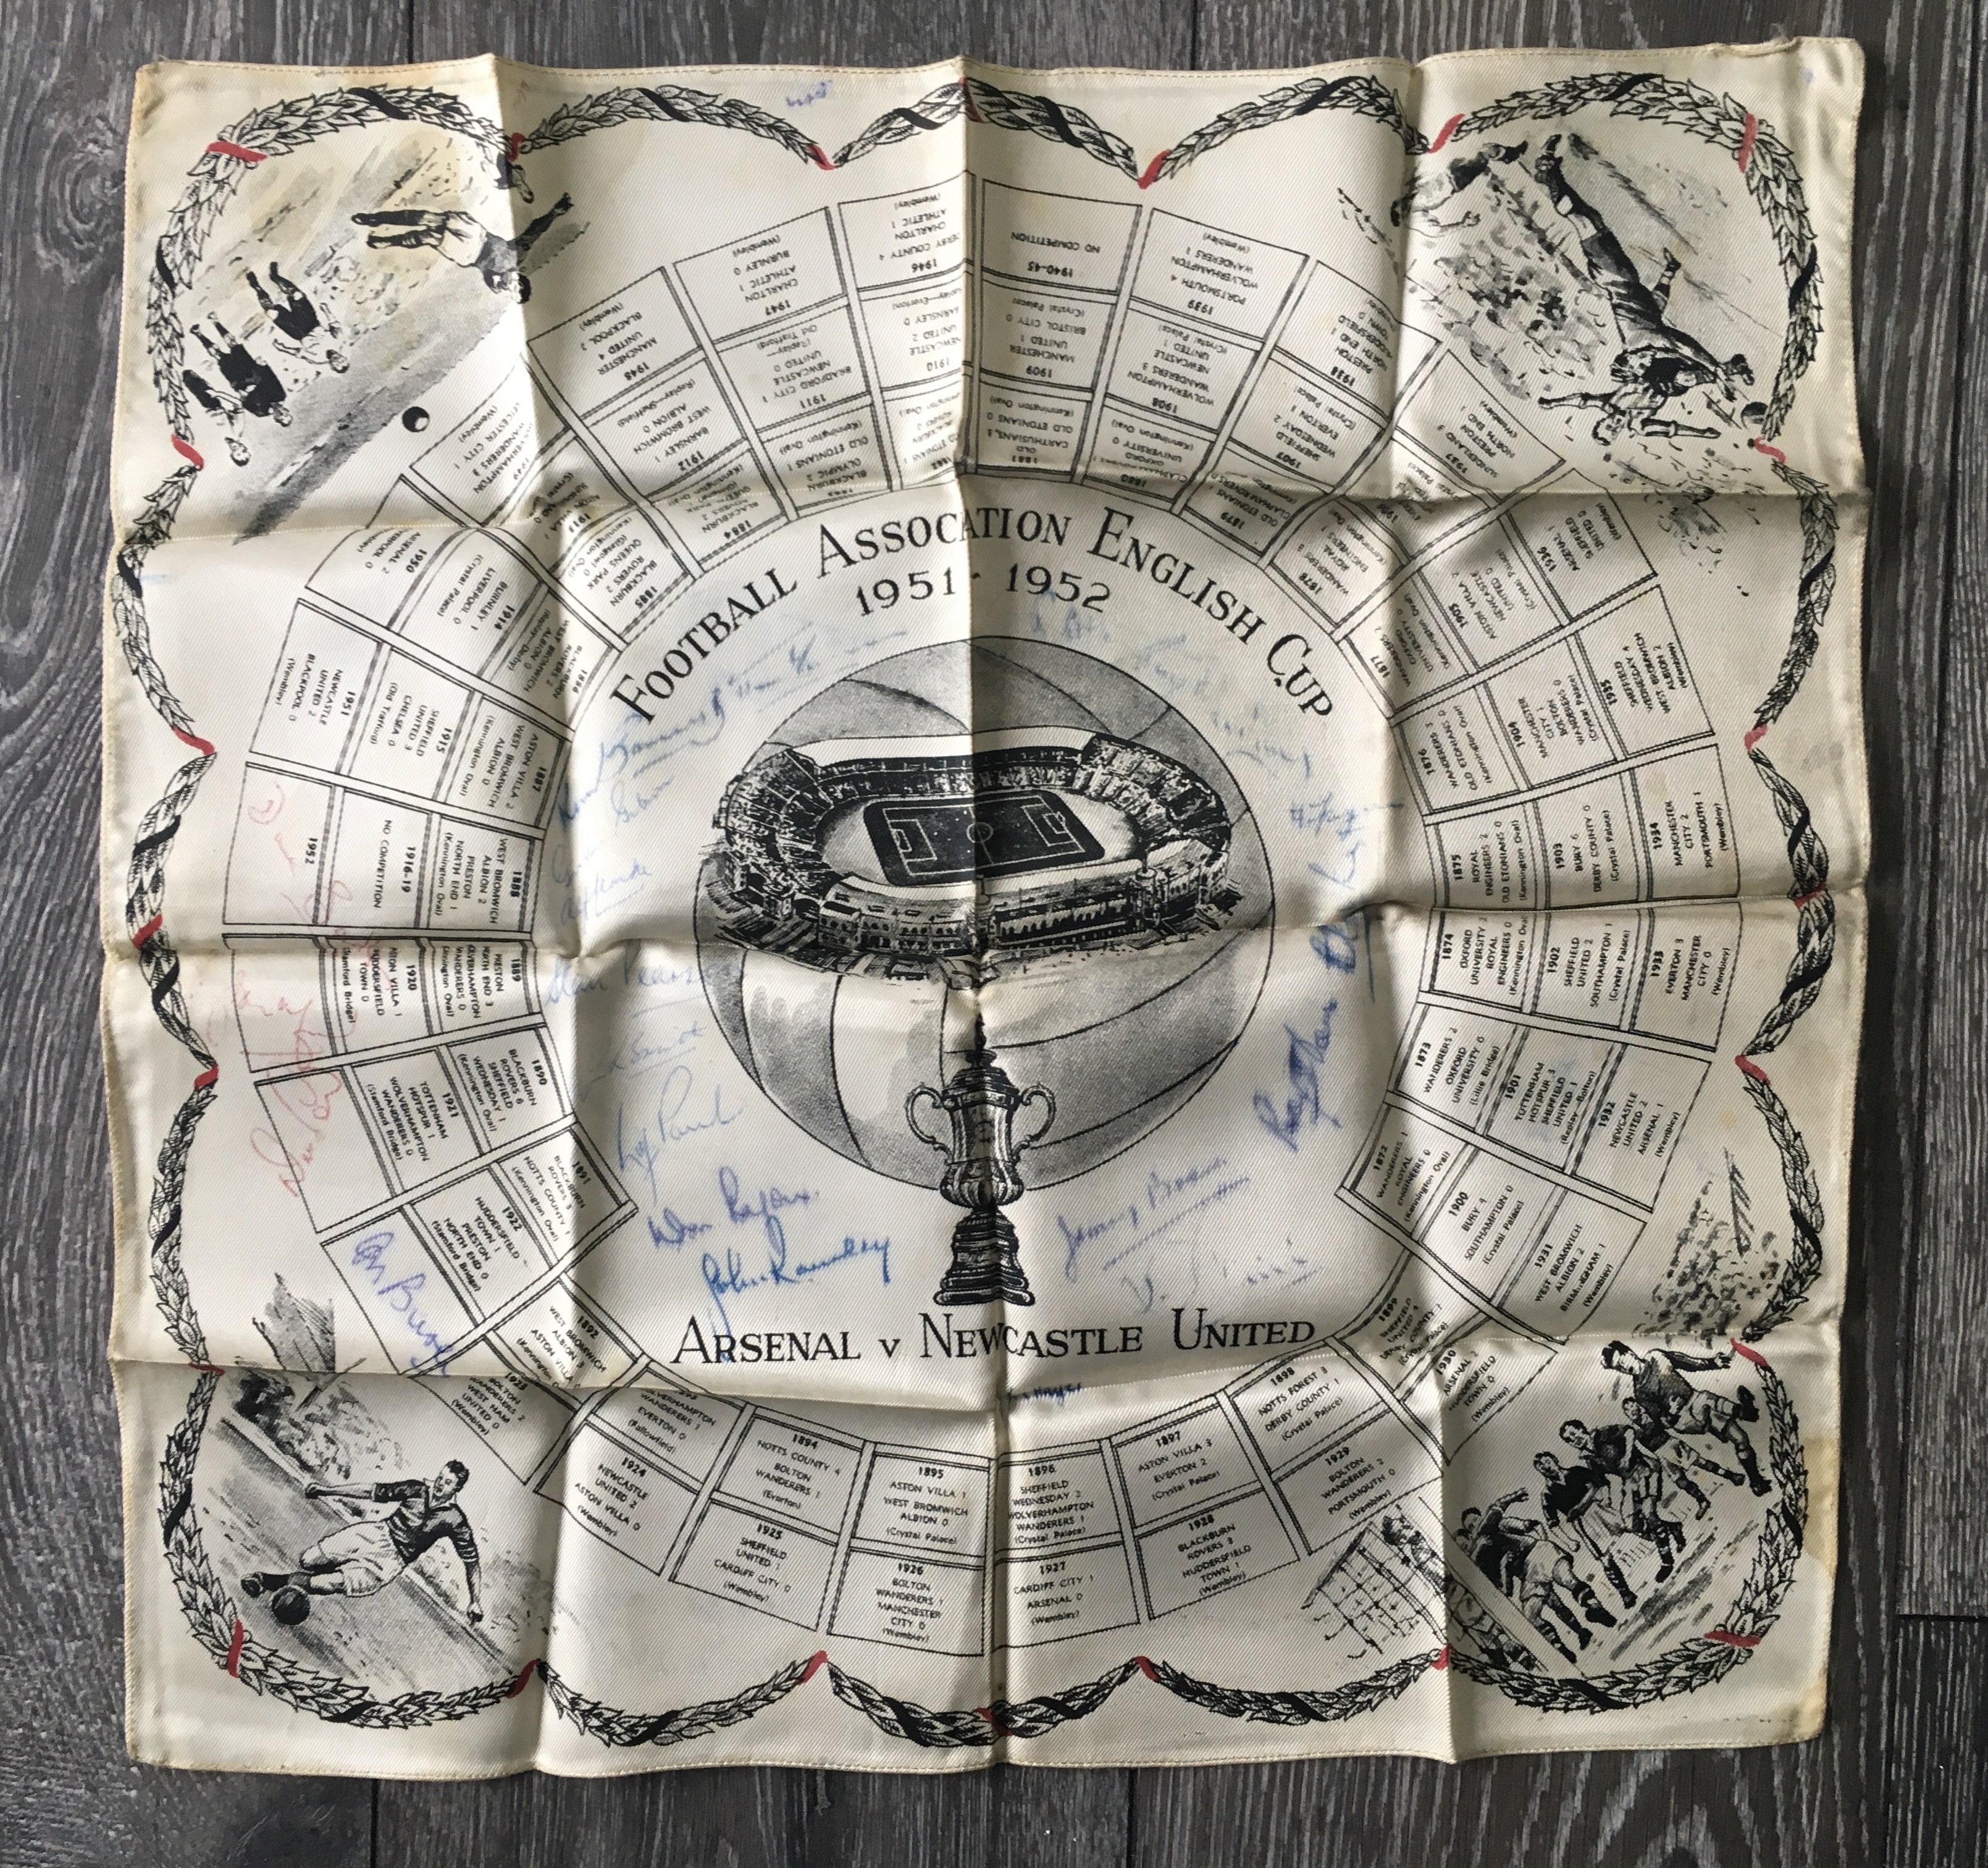 1952 FA Cup Final Signed Handkerchief: Large handk